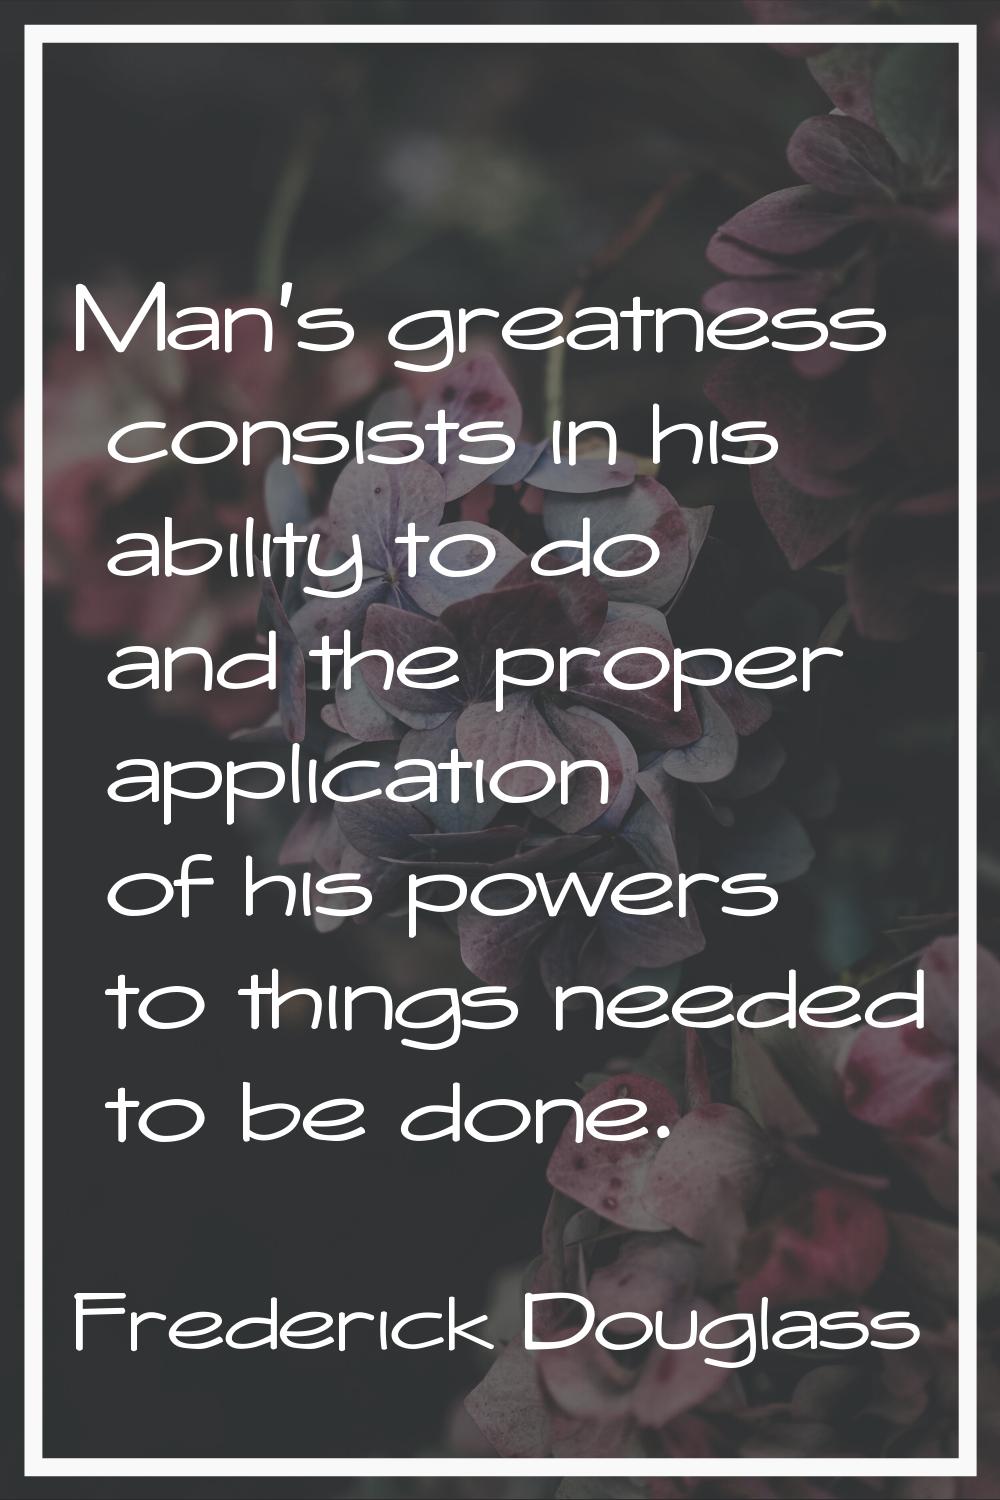 Man's greatness consists in his ability to do and the proper application of his powers to things ne